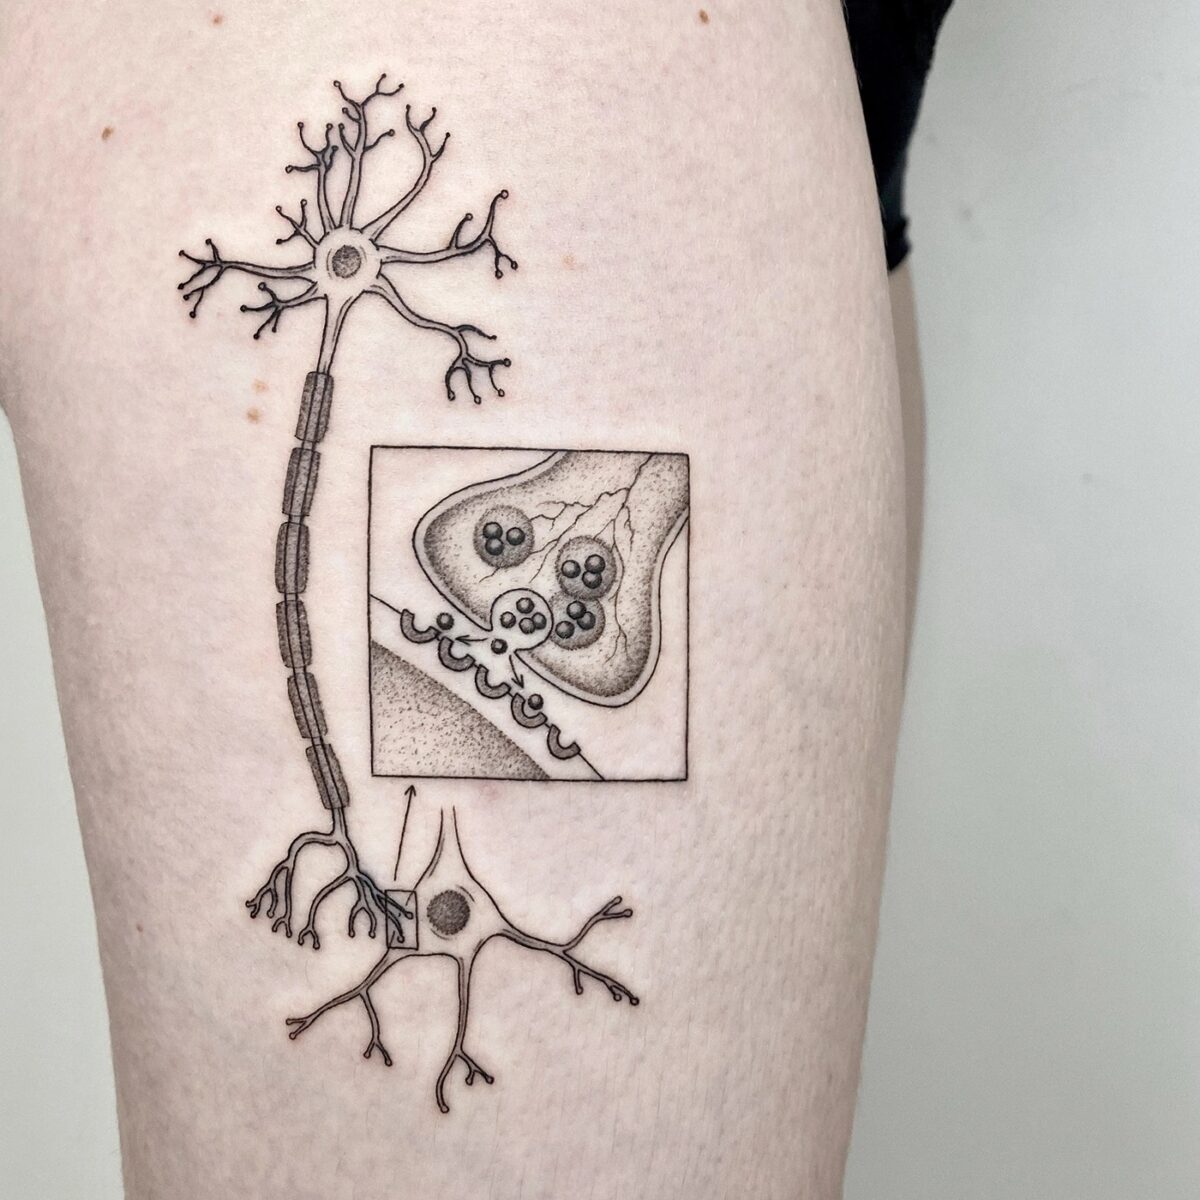 Whimsical vintage science book-inspired tattoos by Michele Volpi